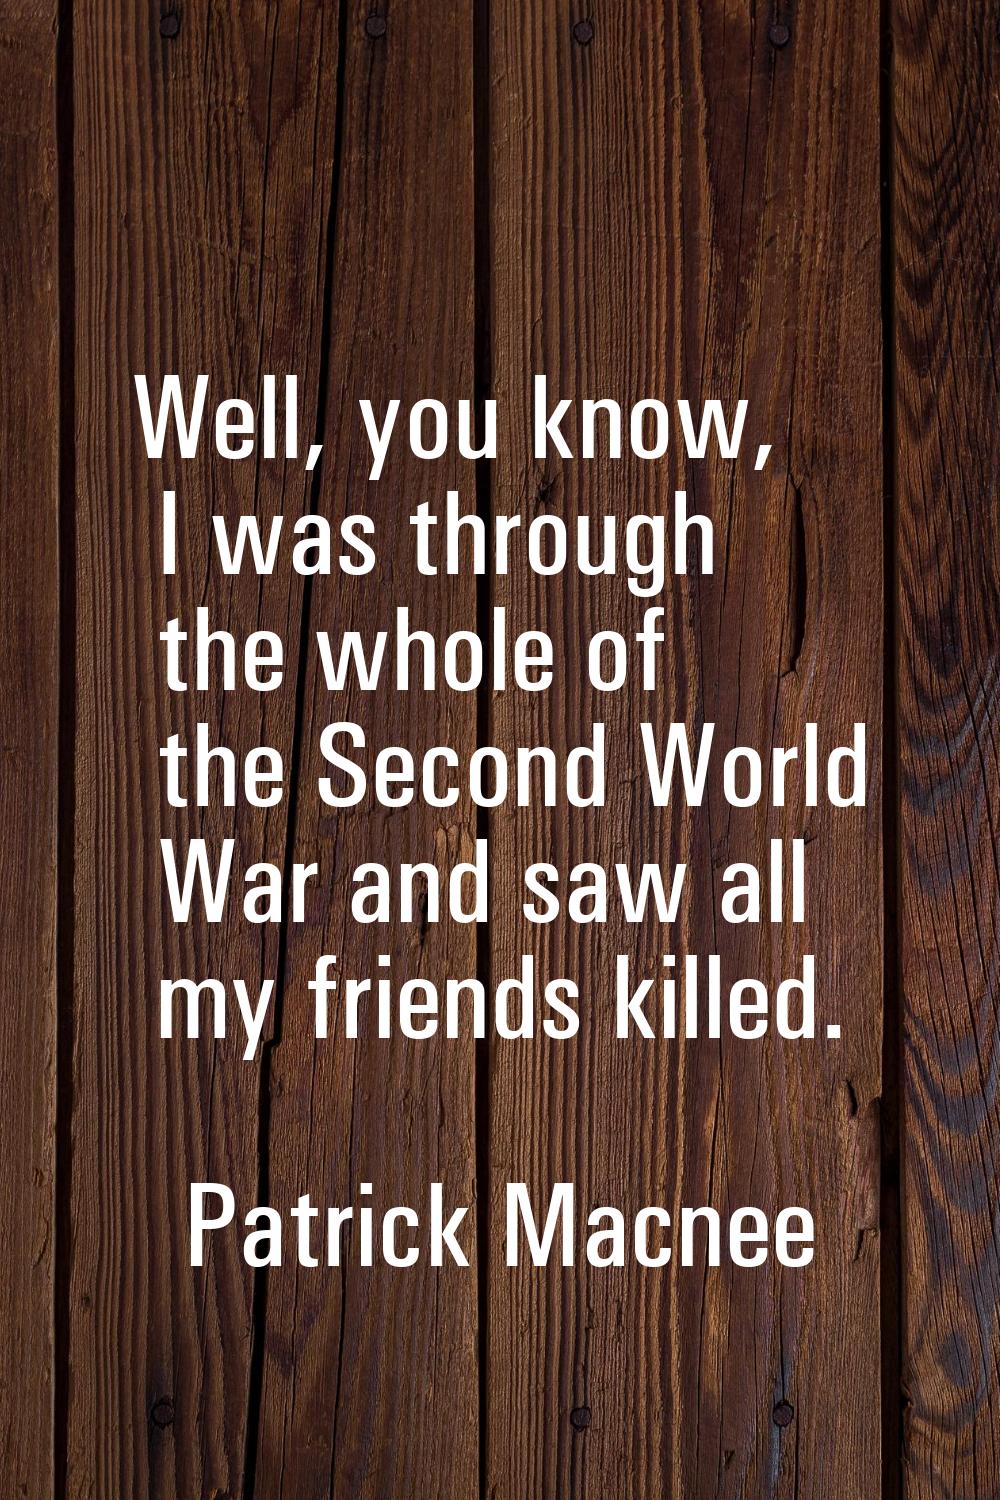 Well, you know, I was through the whole of the Second World War and saw all my friends killed.